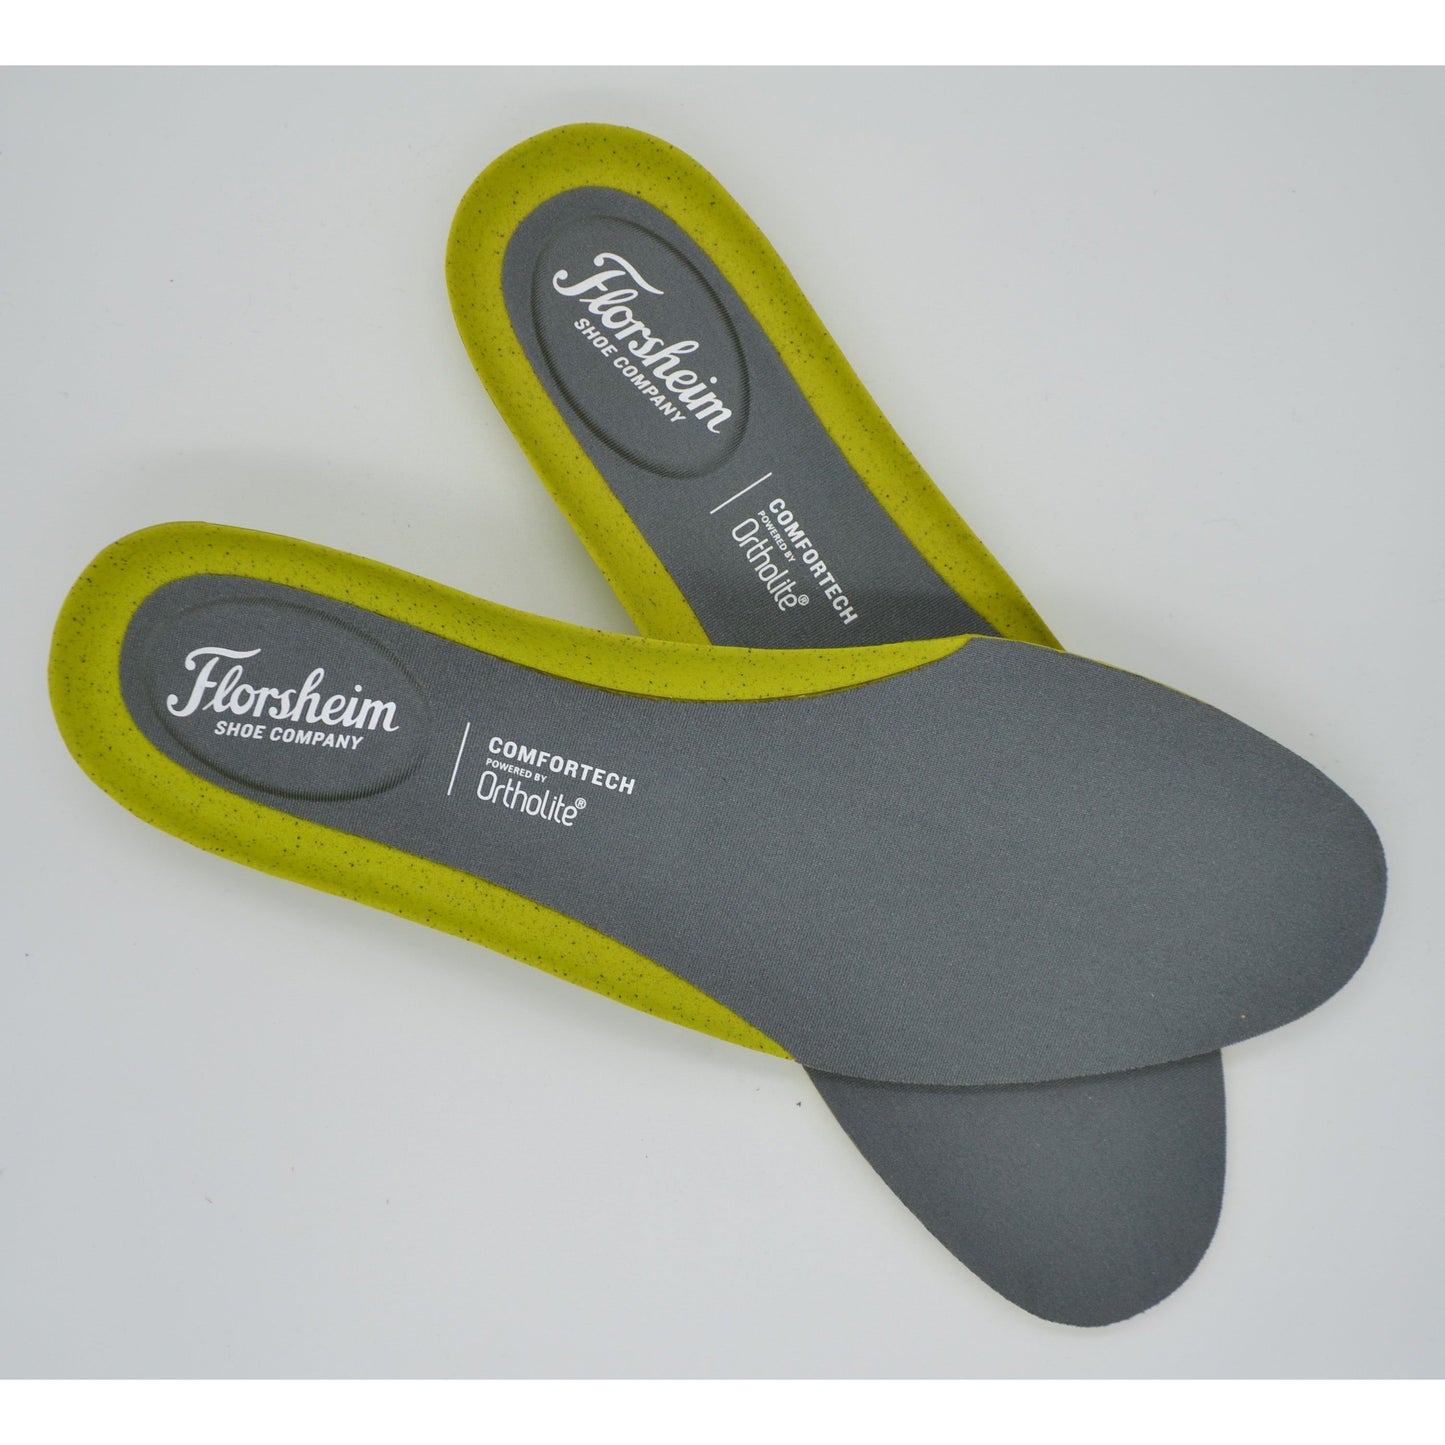 Comfortech Replacement Insoles by Florsheim